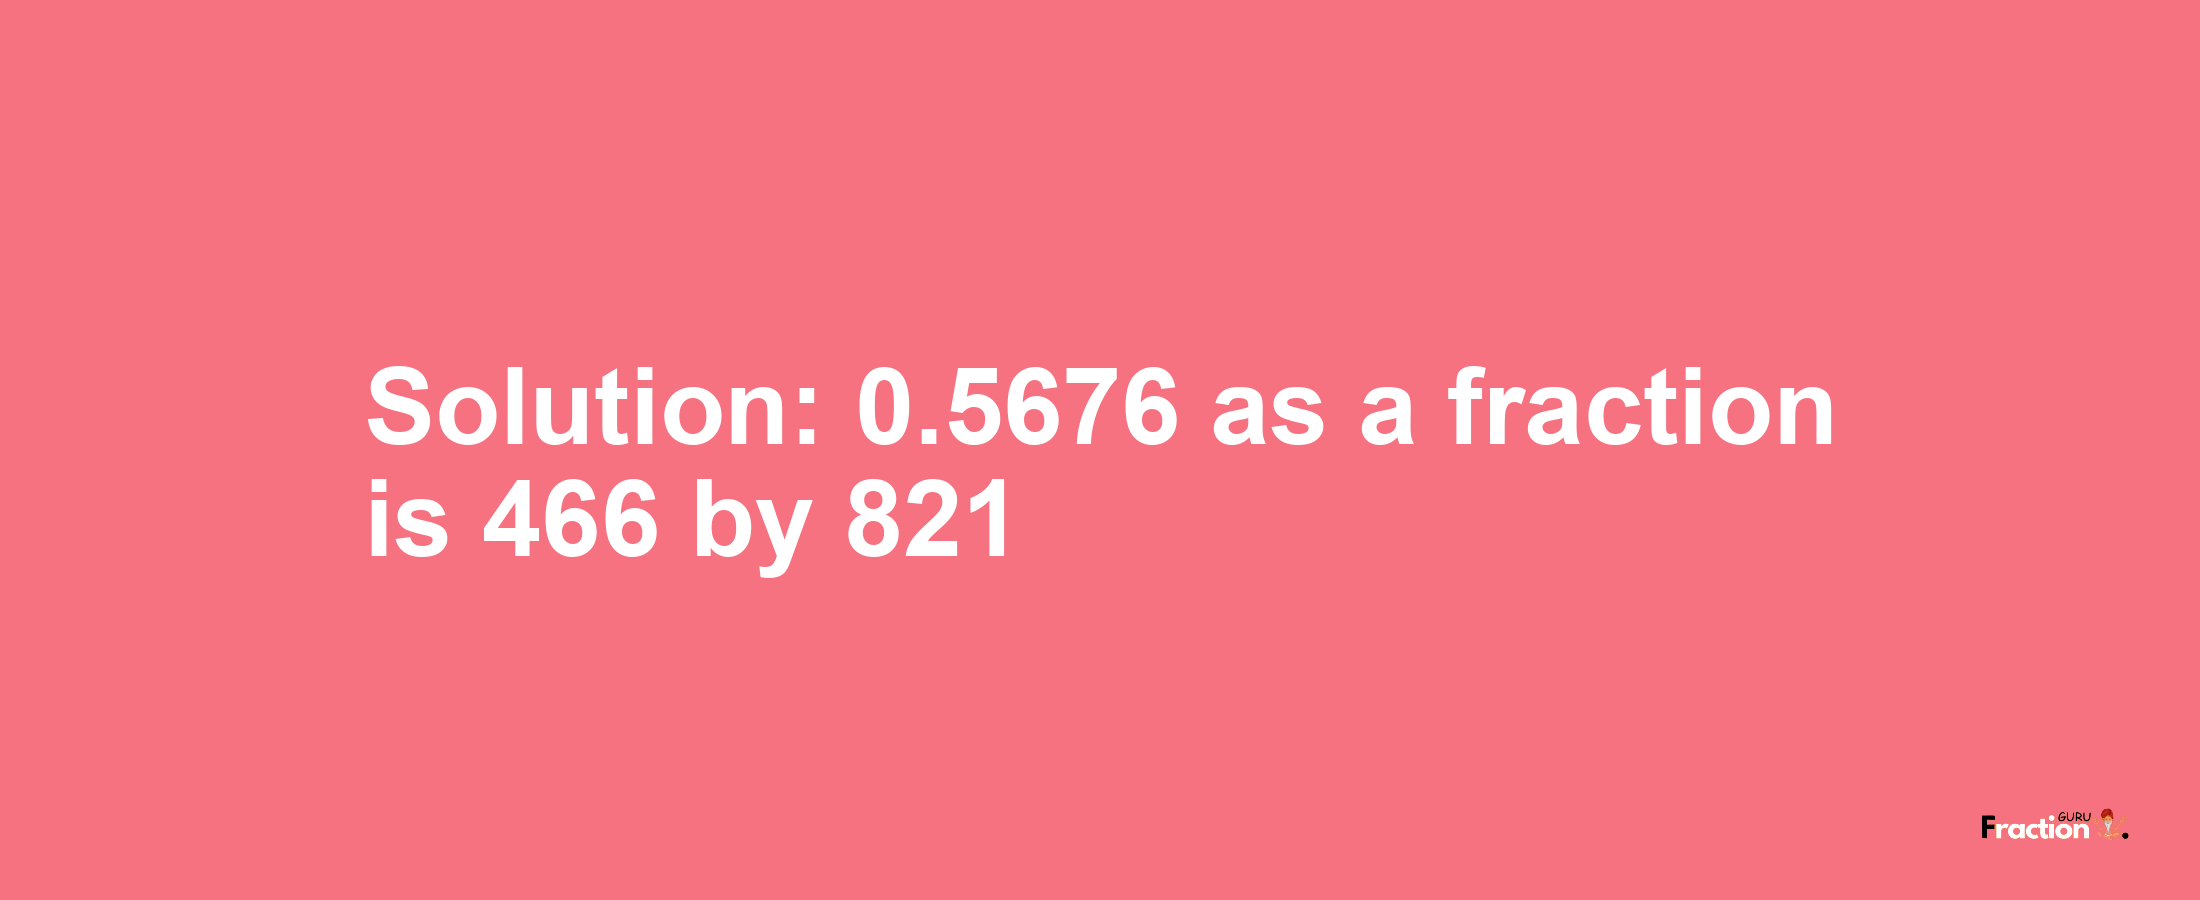 Solution:0.5676 as a fraction is 466/821